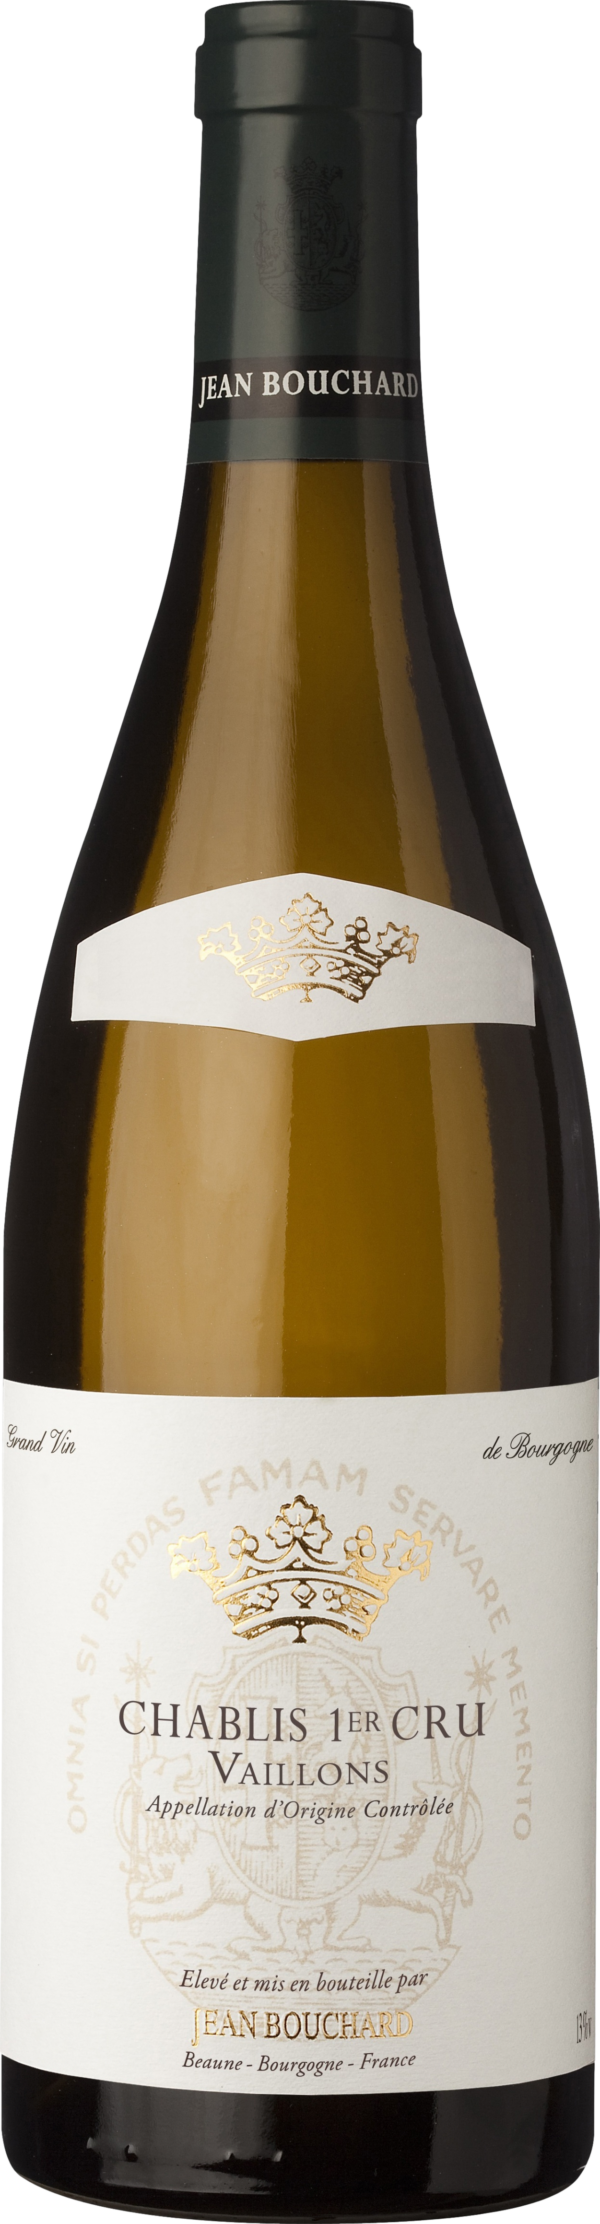 Product image of Jean Bouchard Chablis Premier Cru Vaillons 2021 from 8wines